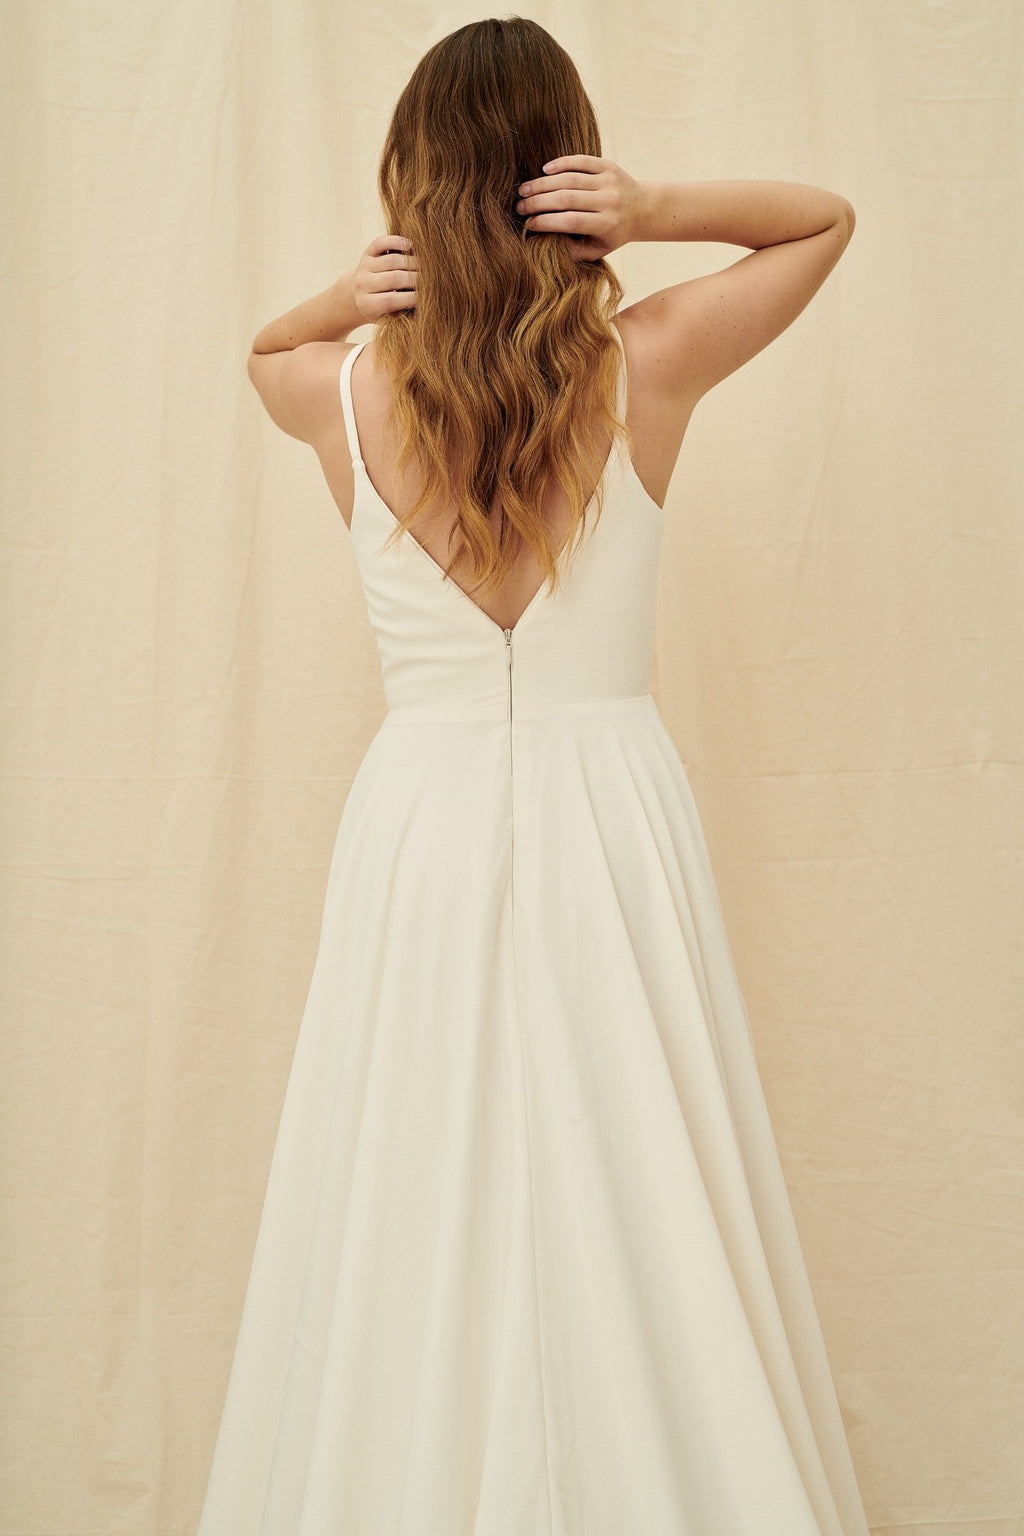 Simple crepe wedding dress with an extra long train and pockets